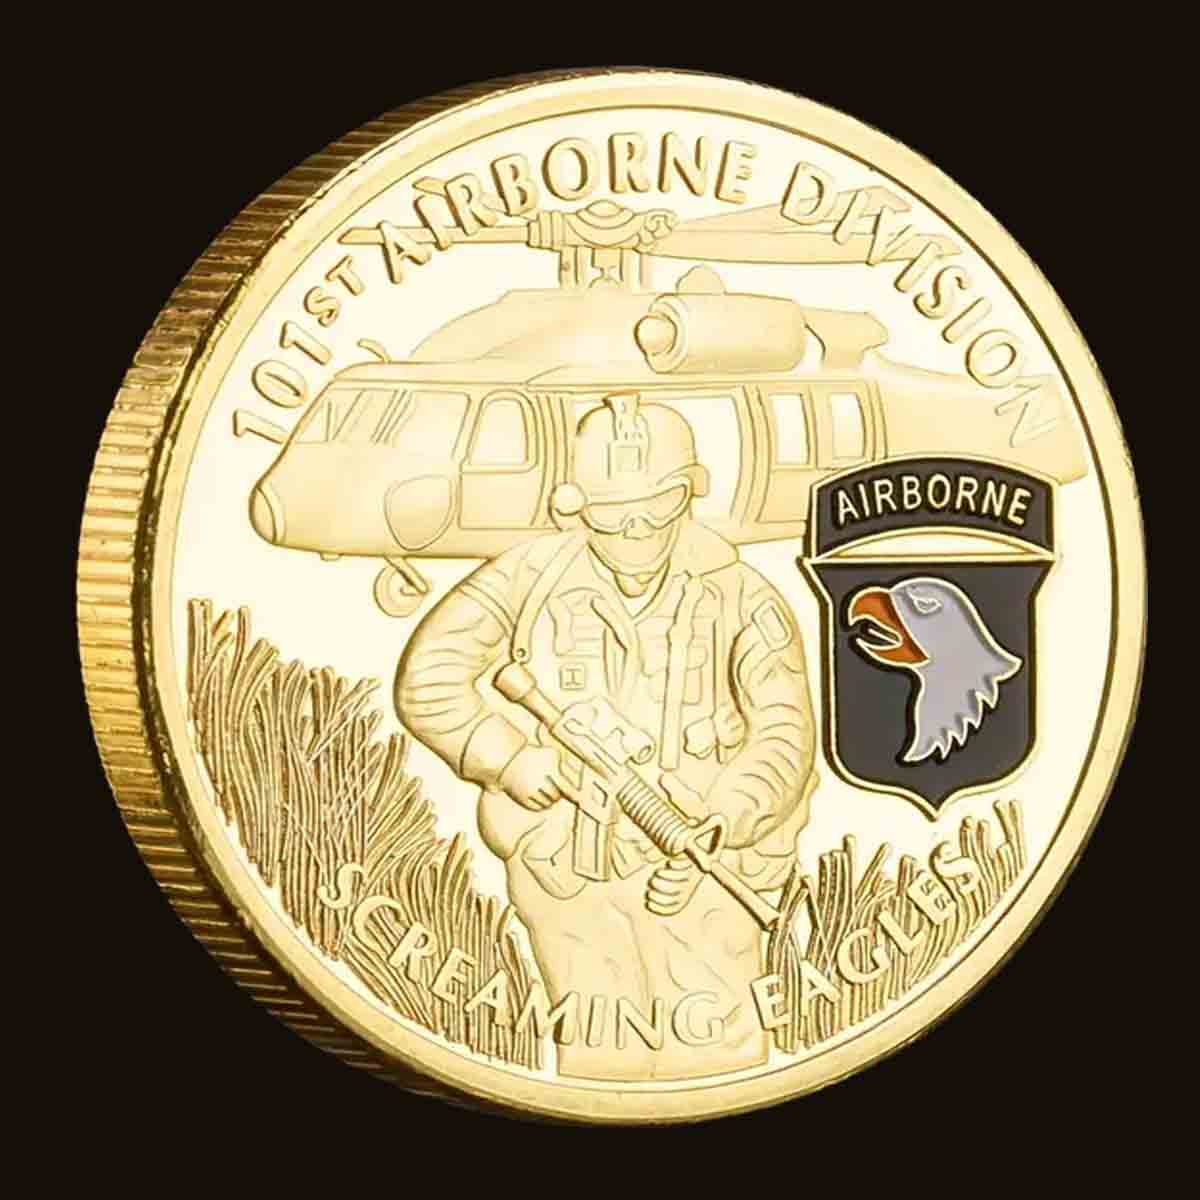 101st Airborne Division "Screaming Eagles" Challenge Coin. High-quality Golden plating for a stunning shine and durability. Intricate design featuring the 101st Airborne Screaming Eagles. Comes in a protective plastic case to preserve its beauty and value. Patriot Gear USA